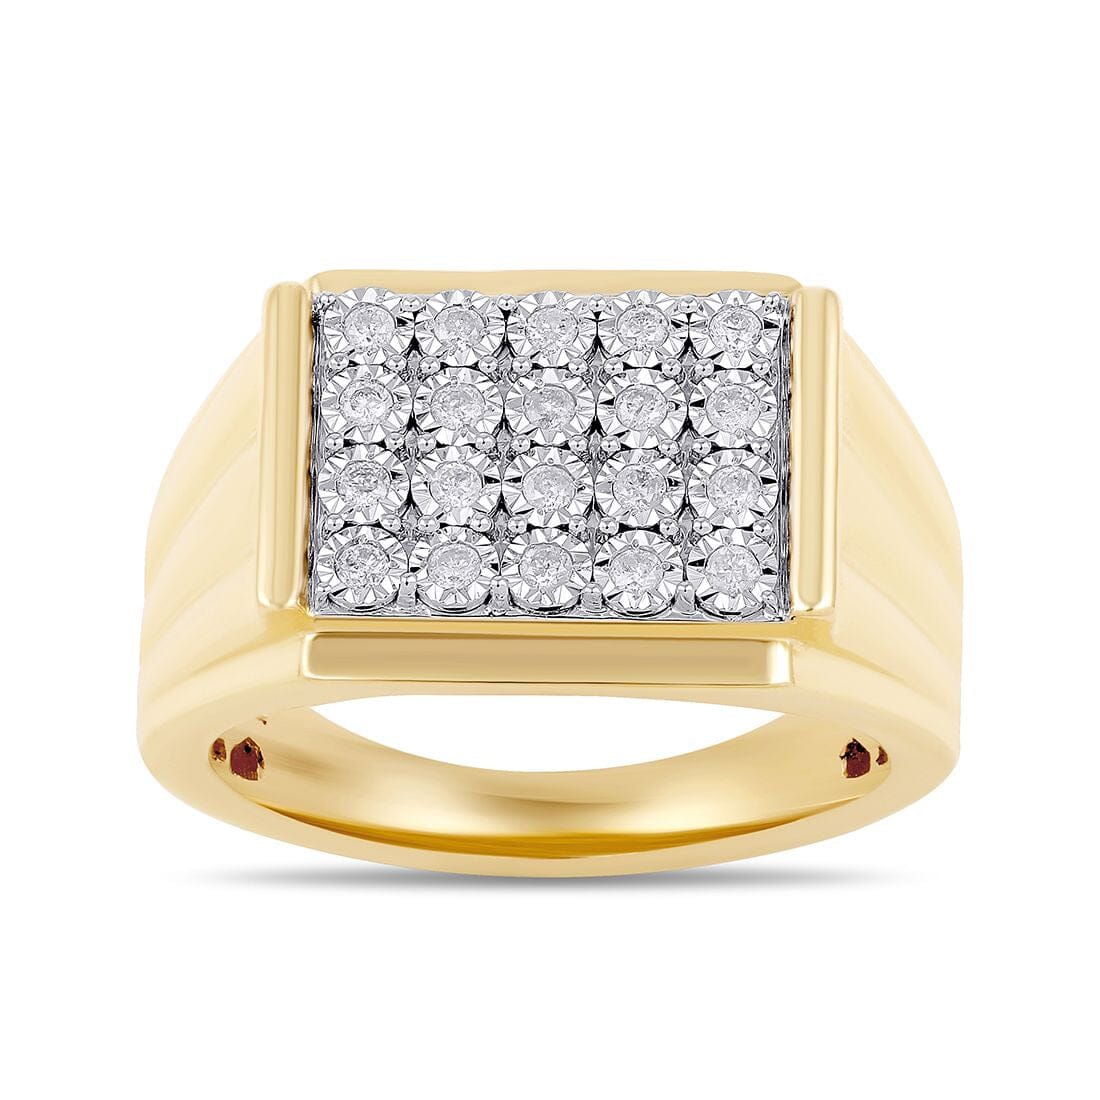 Stanton Made for Men 4 Row Ring with 1/4ct of Diamonds in 9ct Yellow Gold Rings Bevilles 